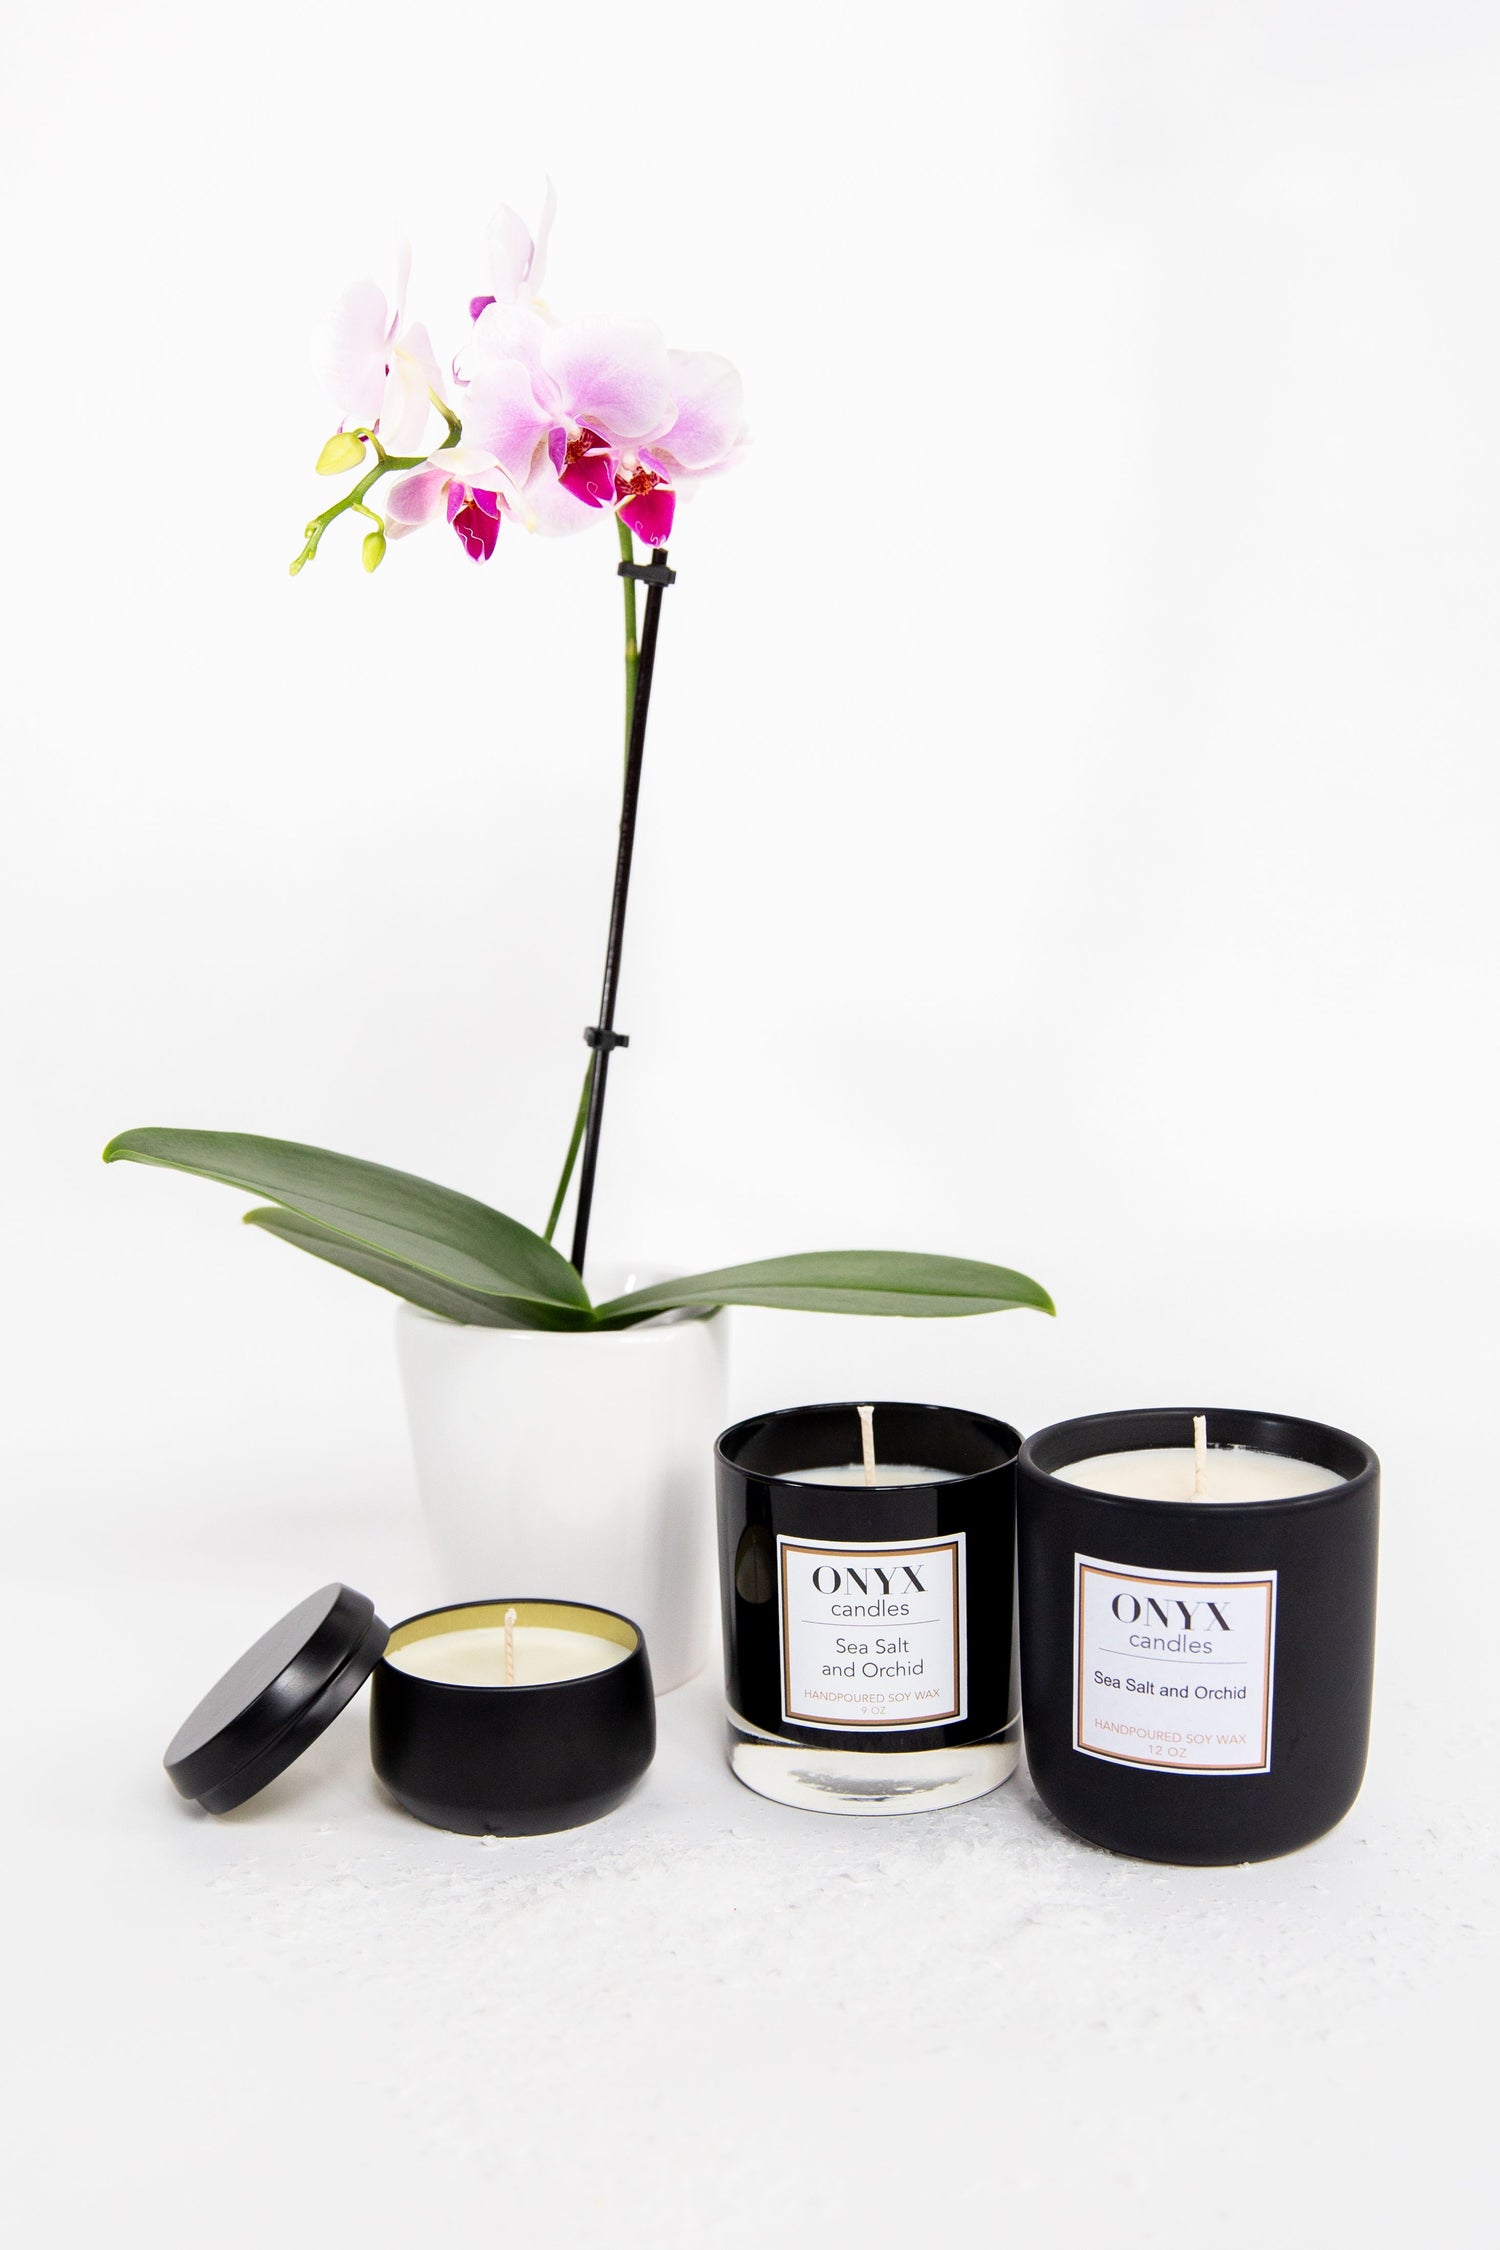 Three size variants for the Onyx candle scent Sea Sald and Orchid, shown with a pink Orchid blooming behind the candles